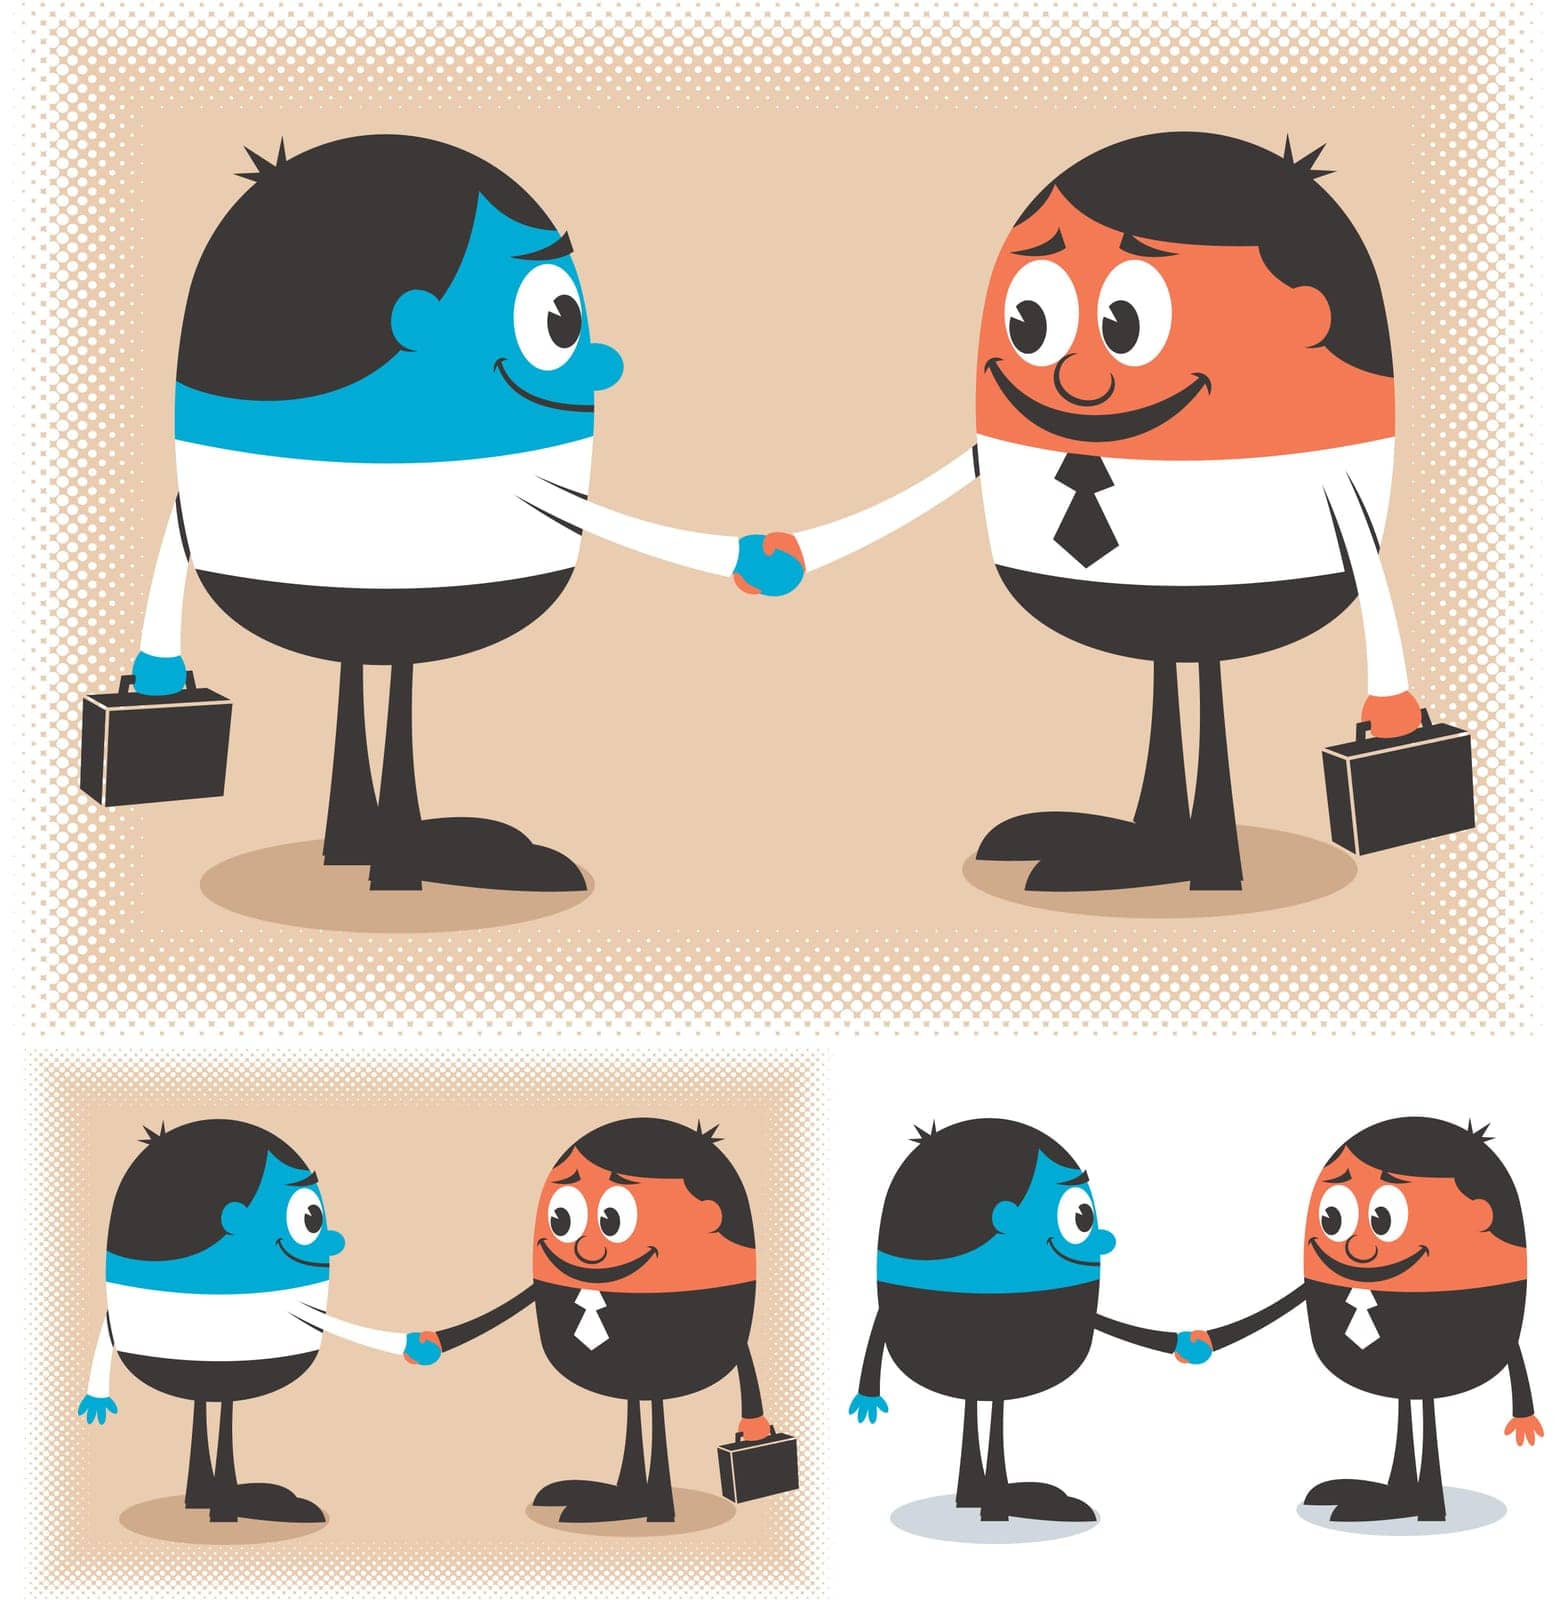 Two cartoon characters handshaking. Below are 2 additional versions of the illustration. 